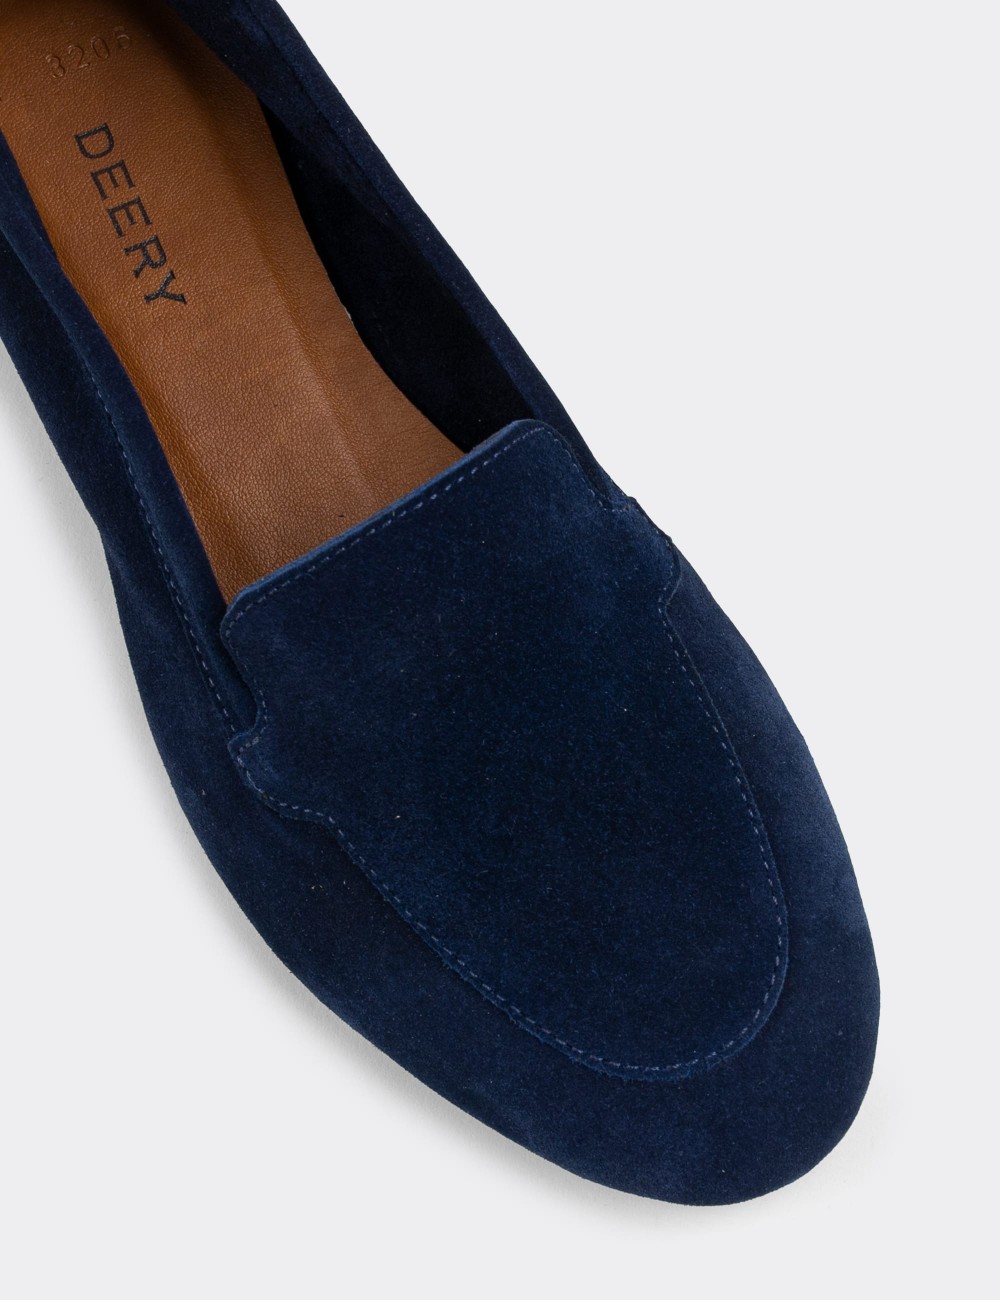 Navy Suede Leather Loafers - E3206ZLCVC02